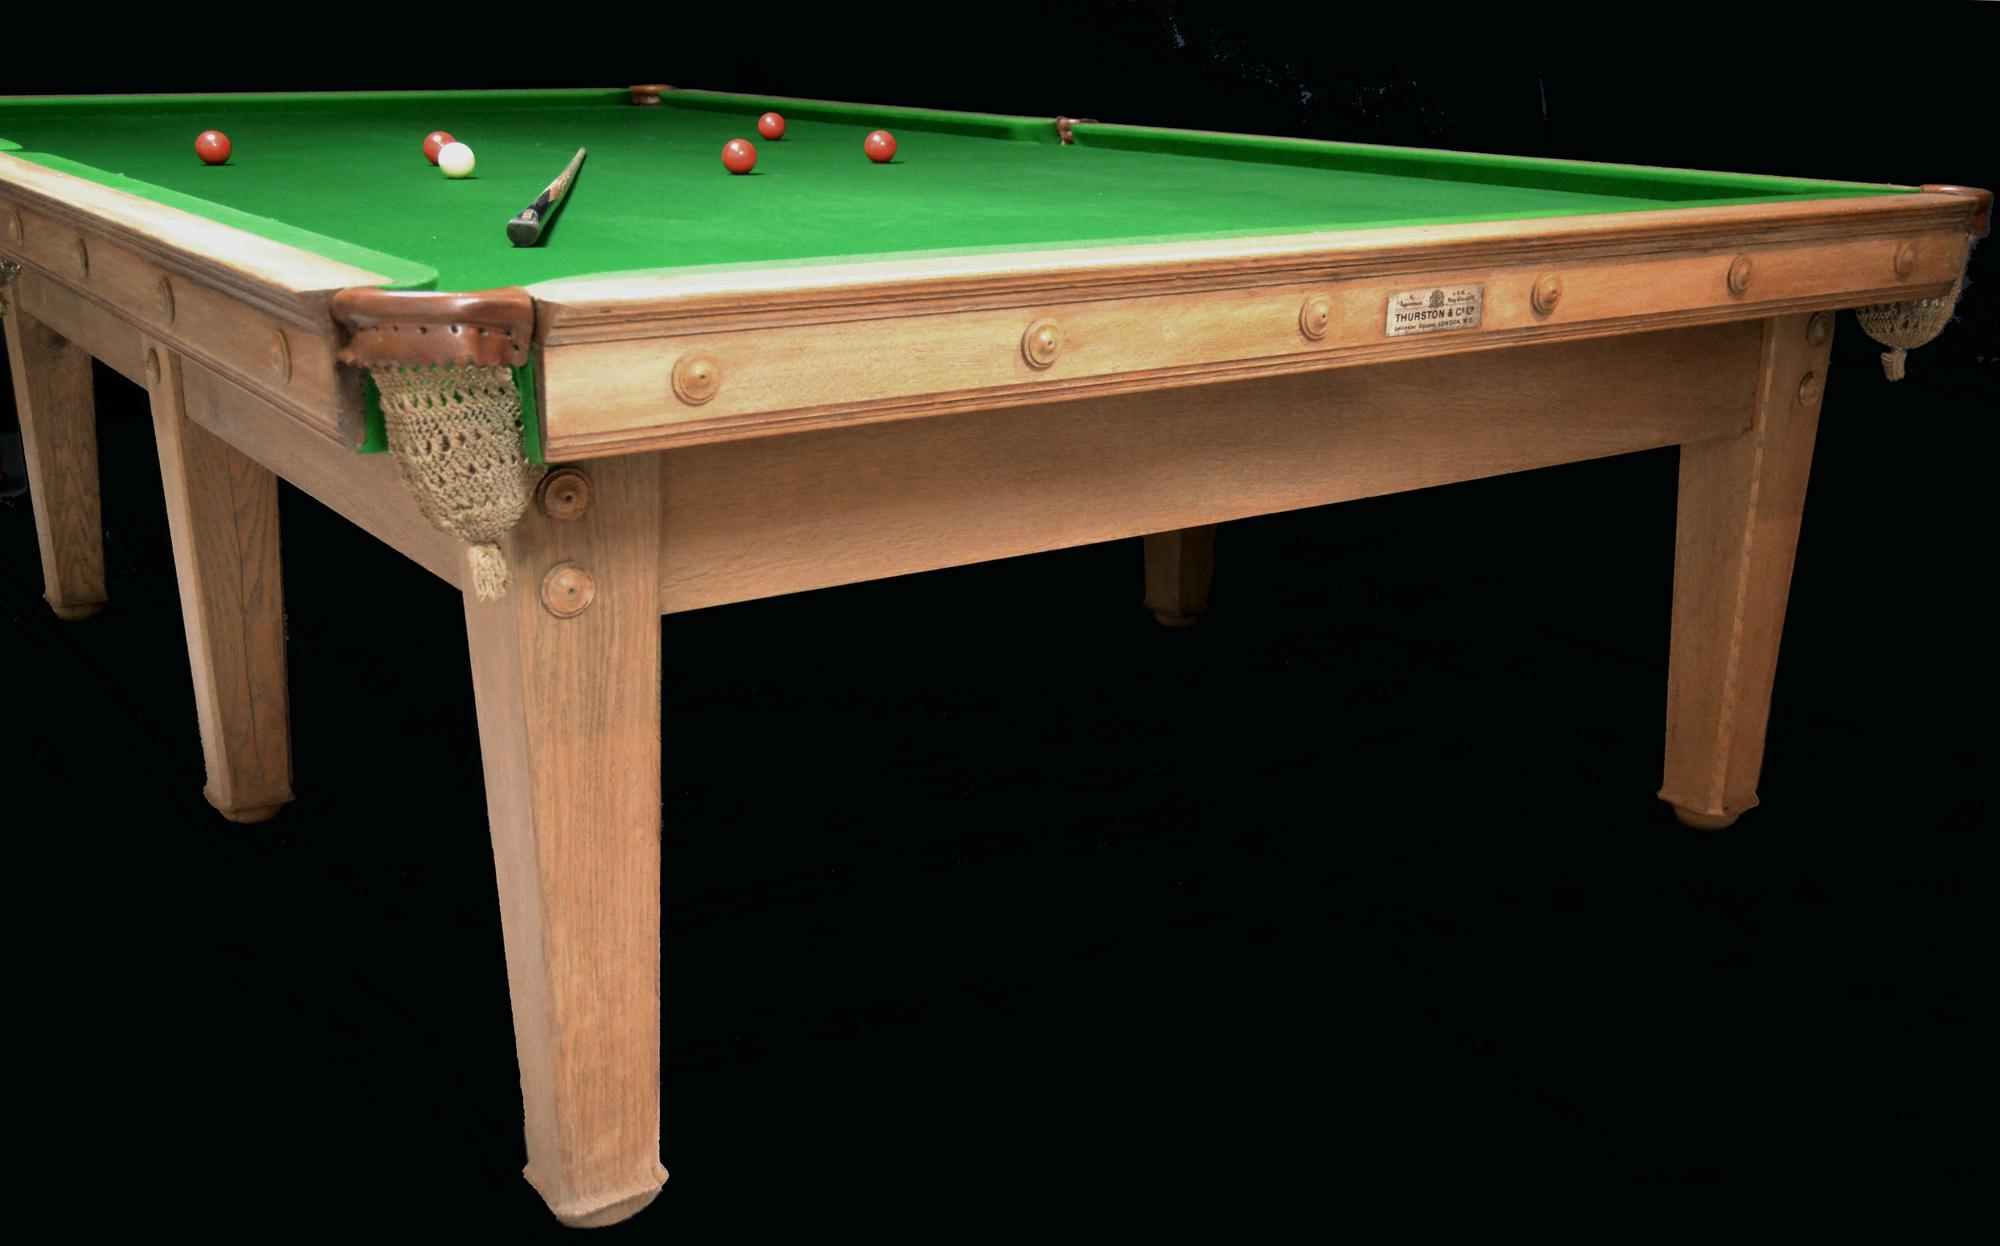 A beautiful 12ft x 6ft oak billiard, snooker or pool table, circa 1907, designed by C F A Voysey, elegant clean lines with tapering chamfered legs.

An identical table was designed by Voysey forThe Homestead at Frinton- on sea, see attached PDF